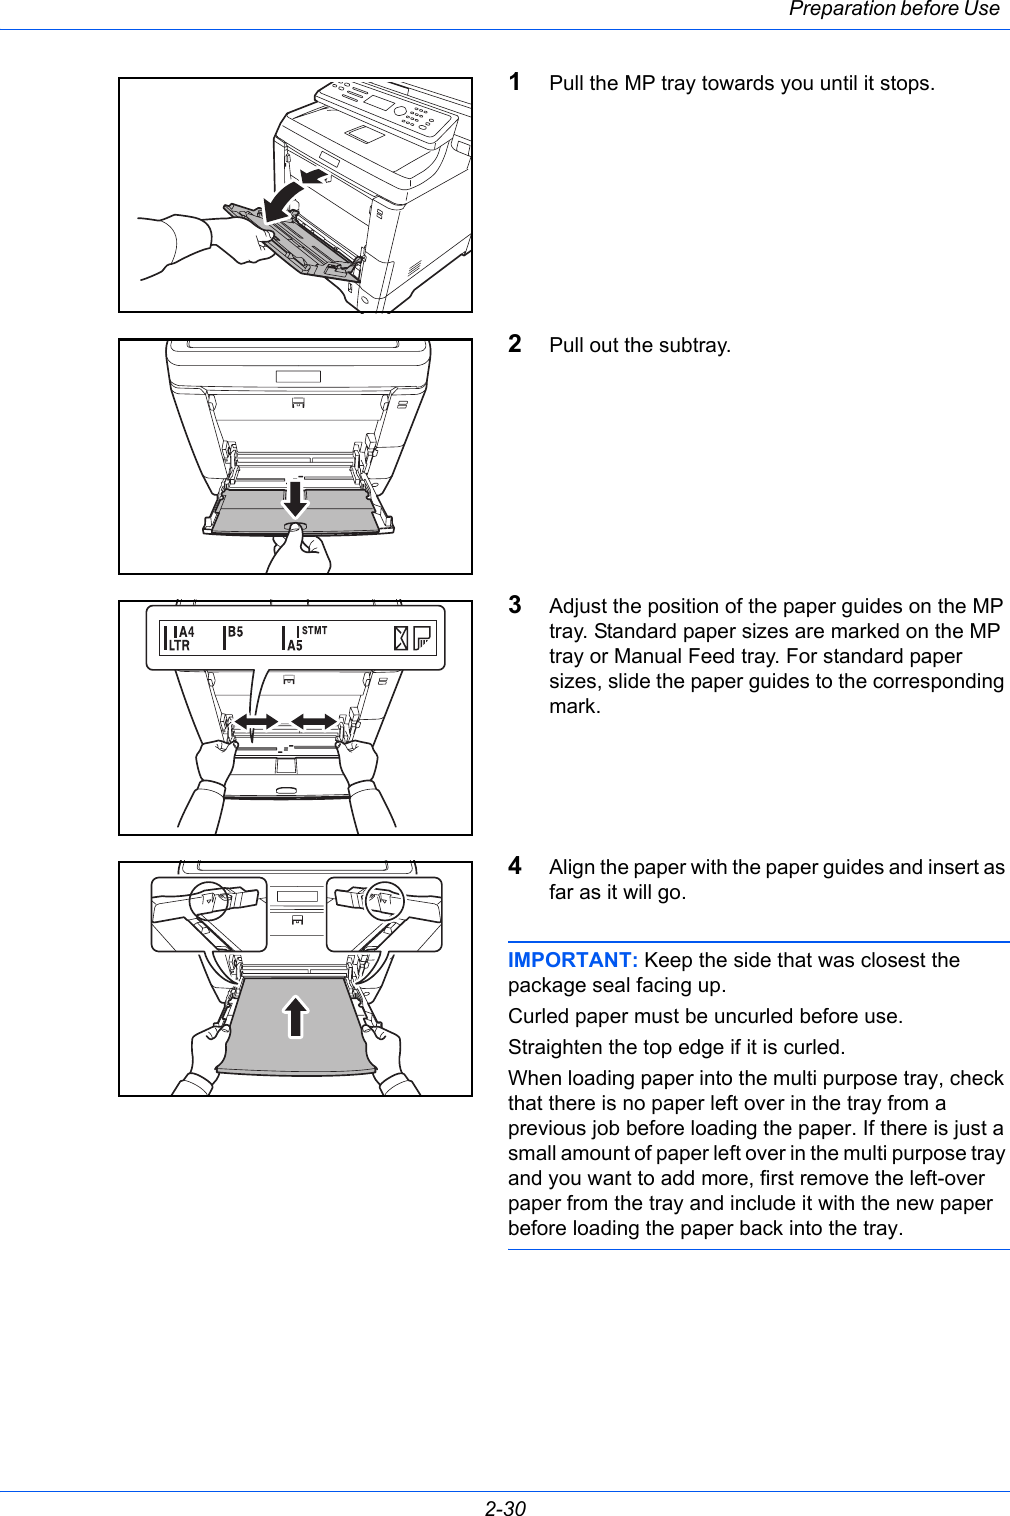 Preparation before Use 2-301Pull the MP tray towards you until it stops.2Pull out the subtray.3Adjust the position of the paper guides on the MP tray. Standard paper sizes are marked on the MP tray or Manual Feed tray. For standard paper sizes, slide the paper guides to the corresponding mark.4Align the paper with the paper guides and insert as far as it will go.IMPORTANT: Keep the side that was closest the package seal facing up.Curled paper must be uncurled before use.Straighten the top edge if it is curled.When loading paper into the multi purpose tray, check that there is no paper left over in the tray from a previous job before loading the paper. If there is just a small amount of paper left over in the multi purpose tray and you want to add more, first remove the left-over paper from the tray and include it with the new paper before loading the paper back into the tray.